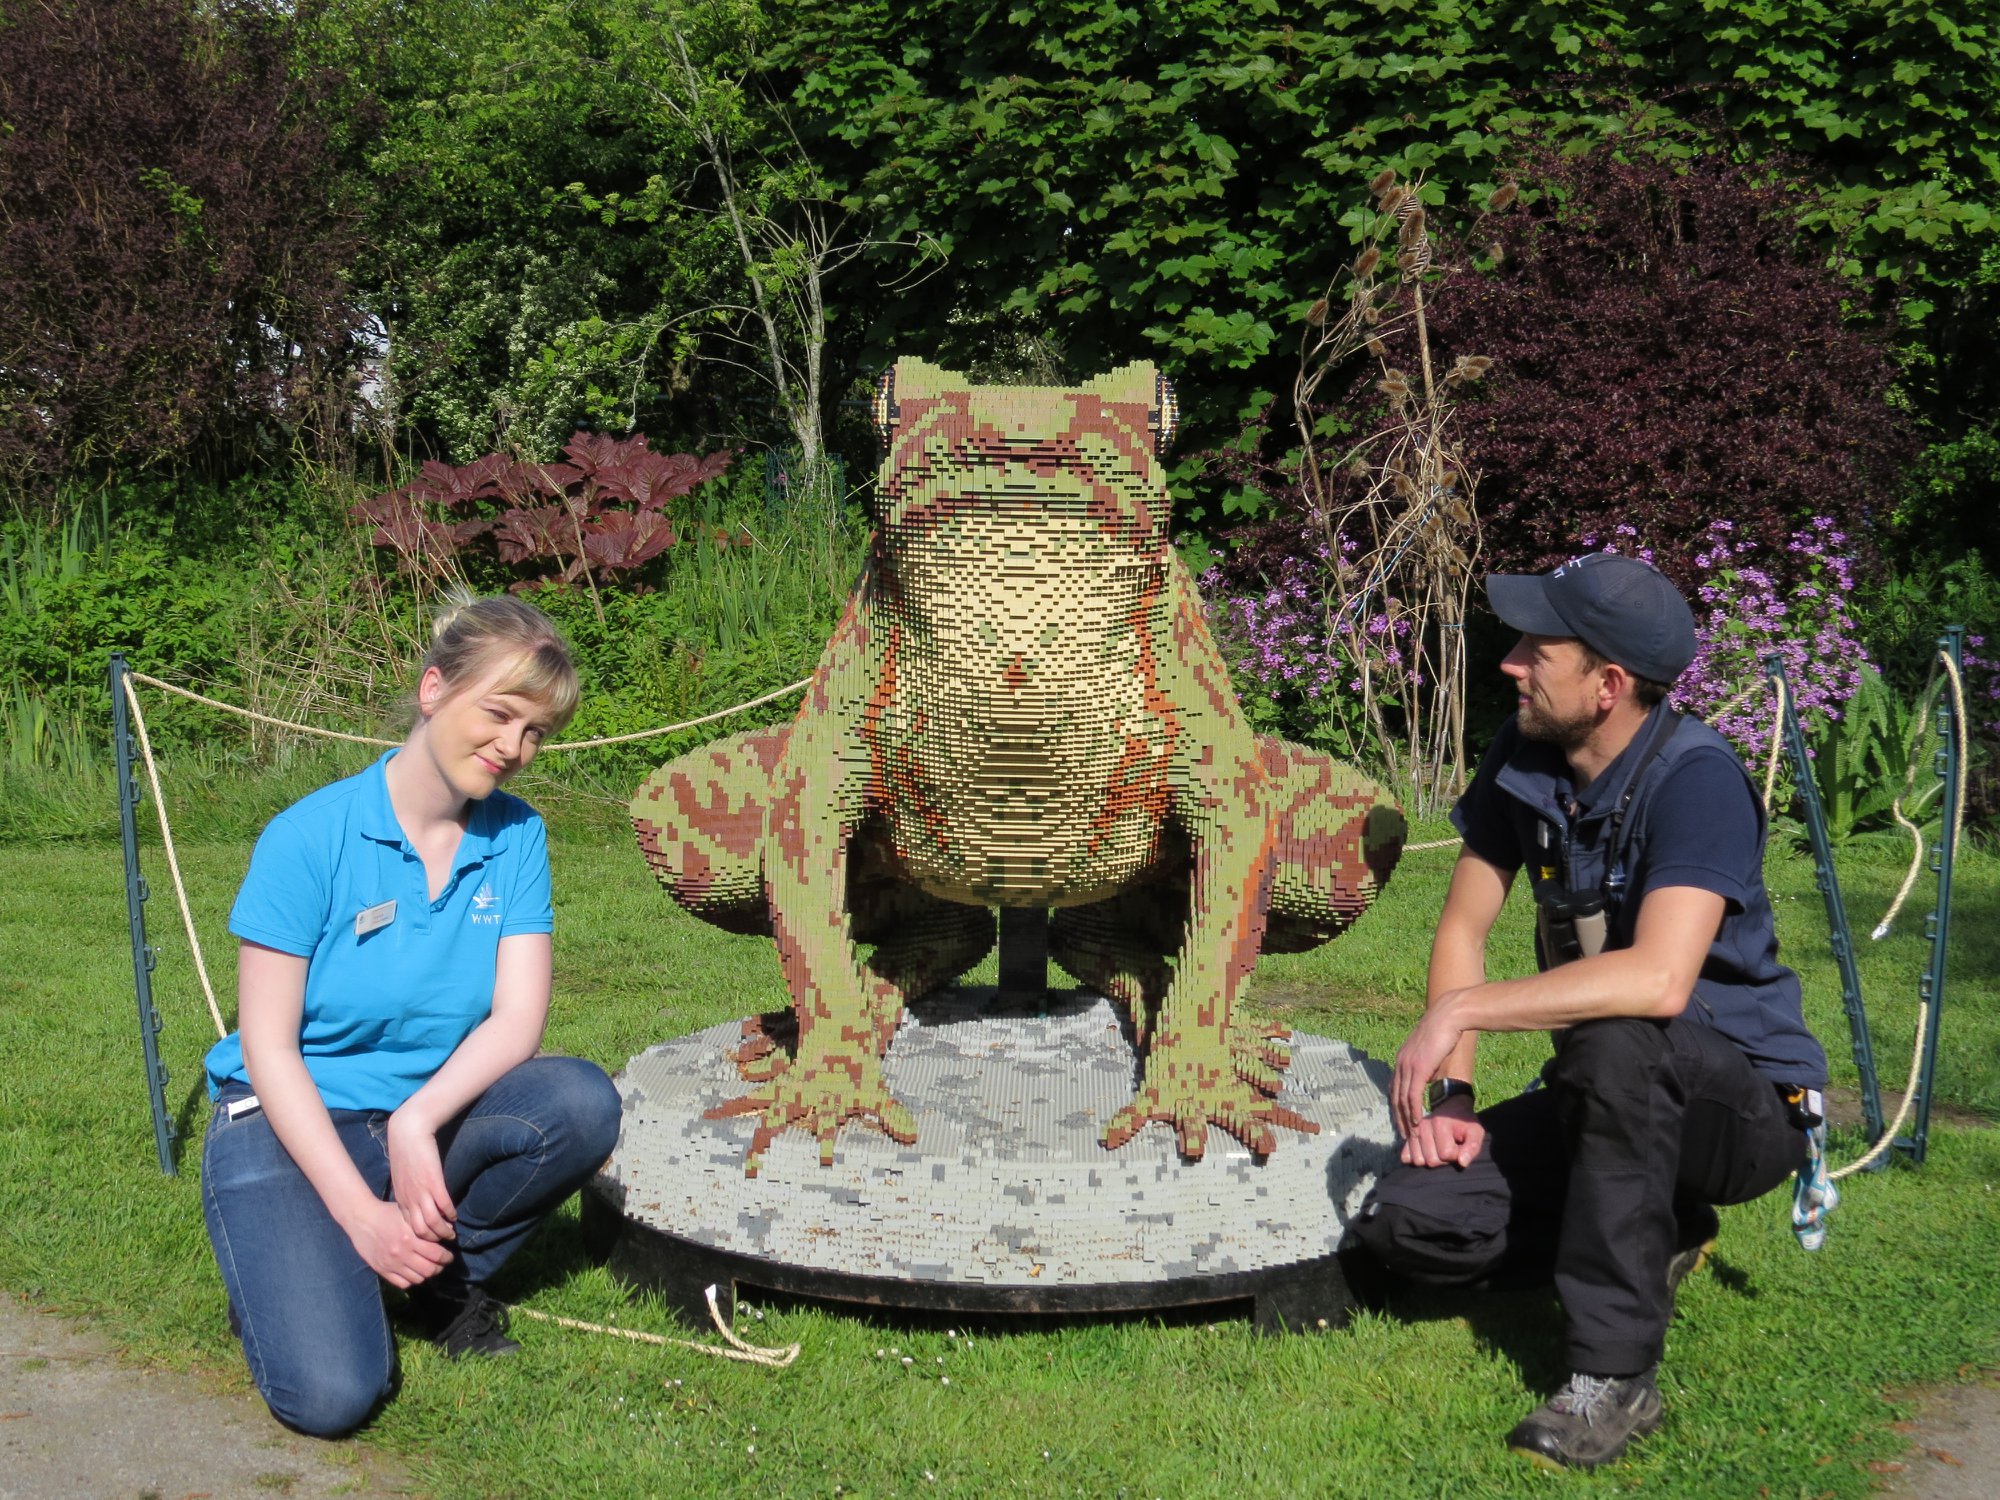 Spring is back, and so are the Giant Lego Brick Animals